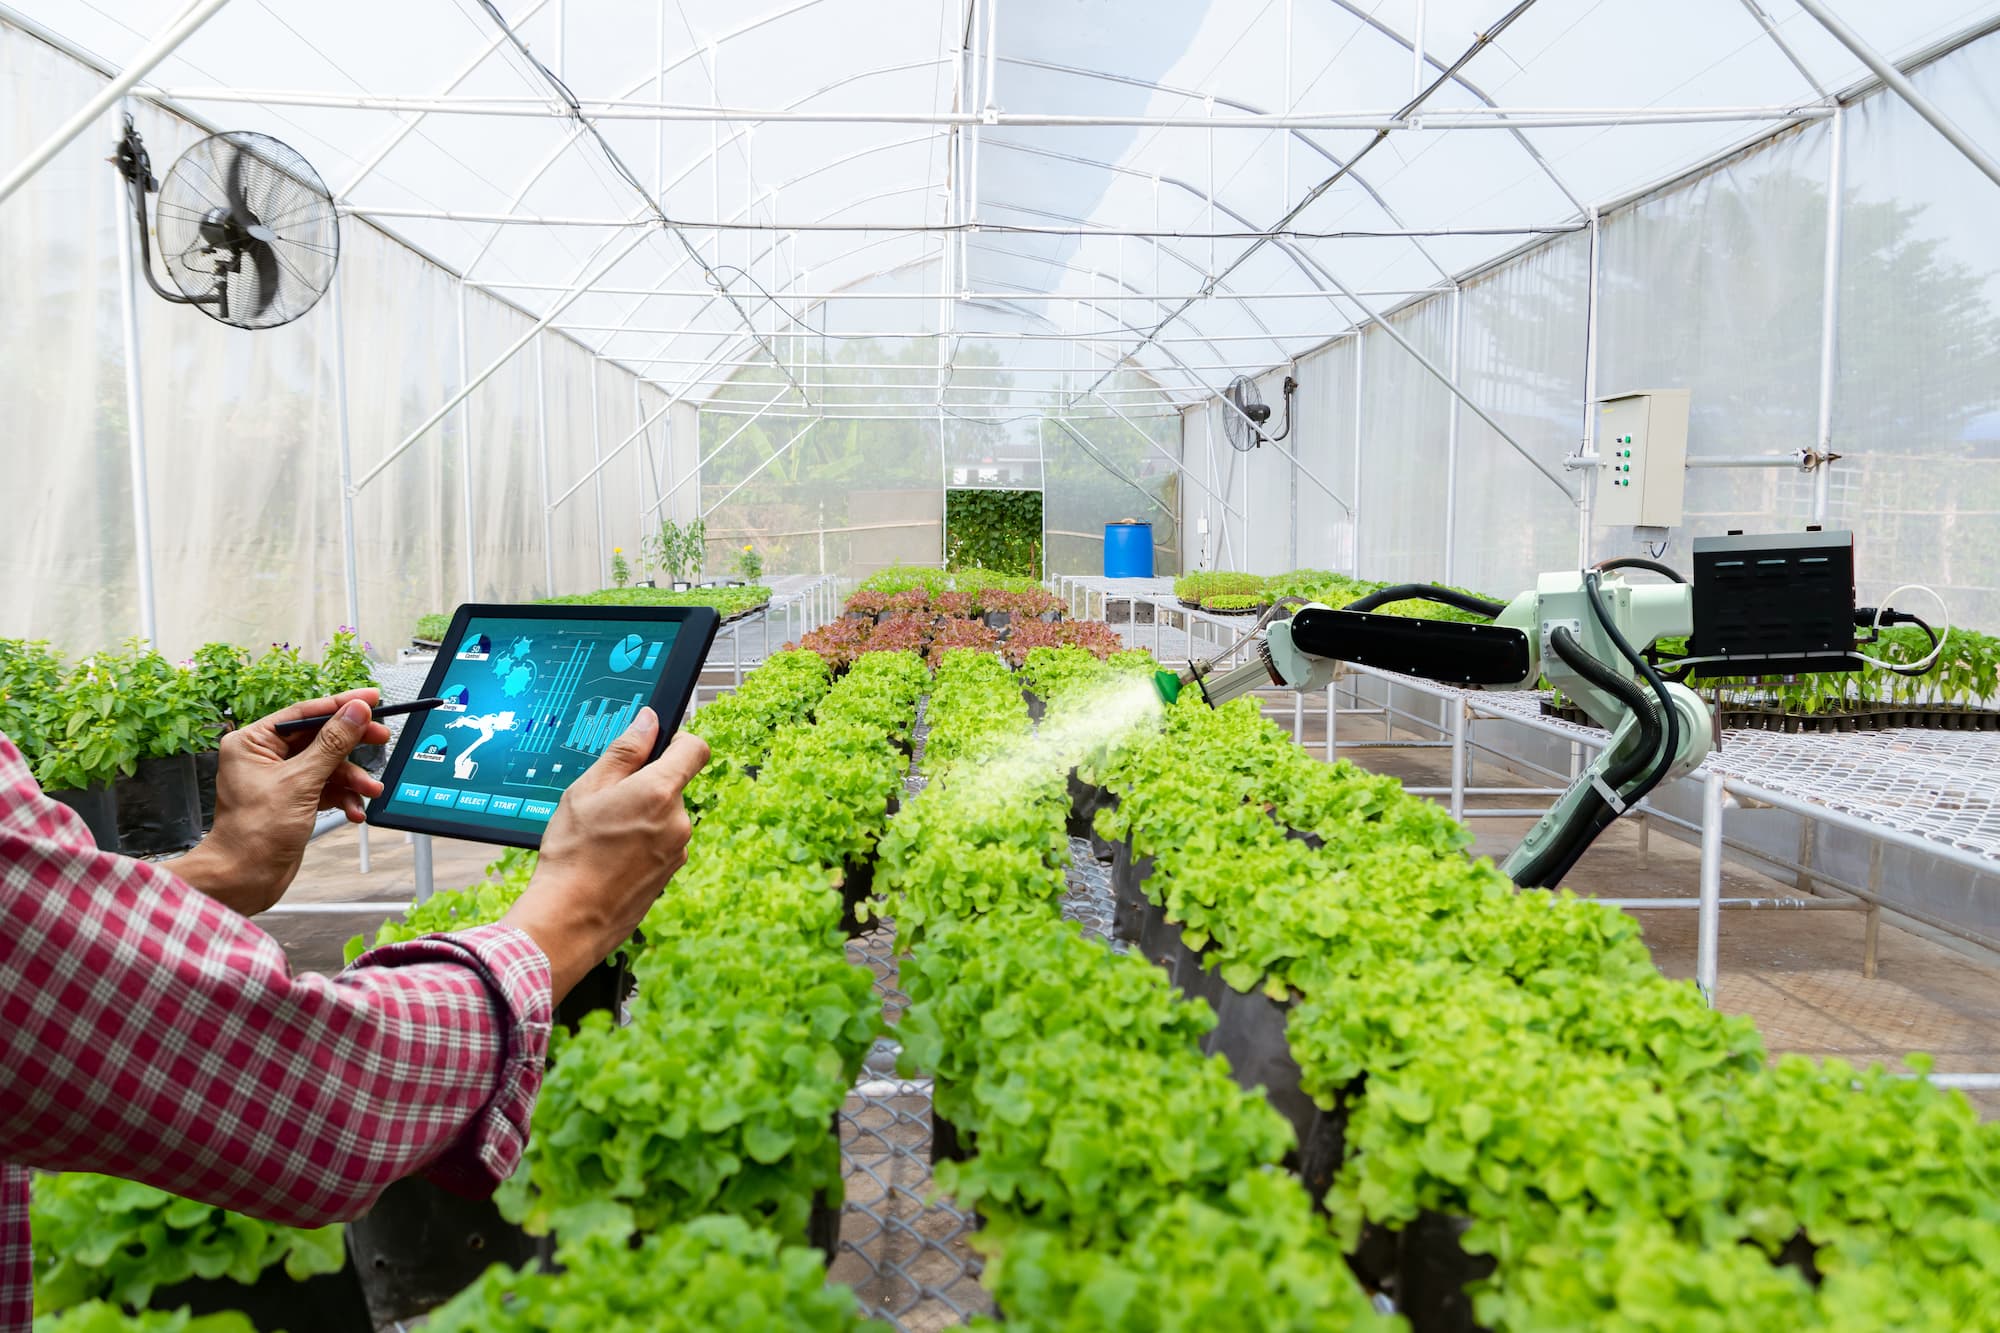 The difference between intelligent greenhouse and traditional greenhouse